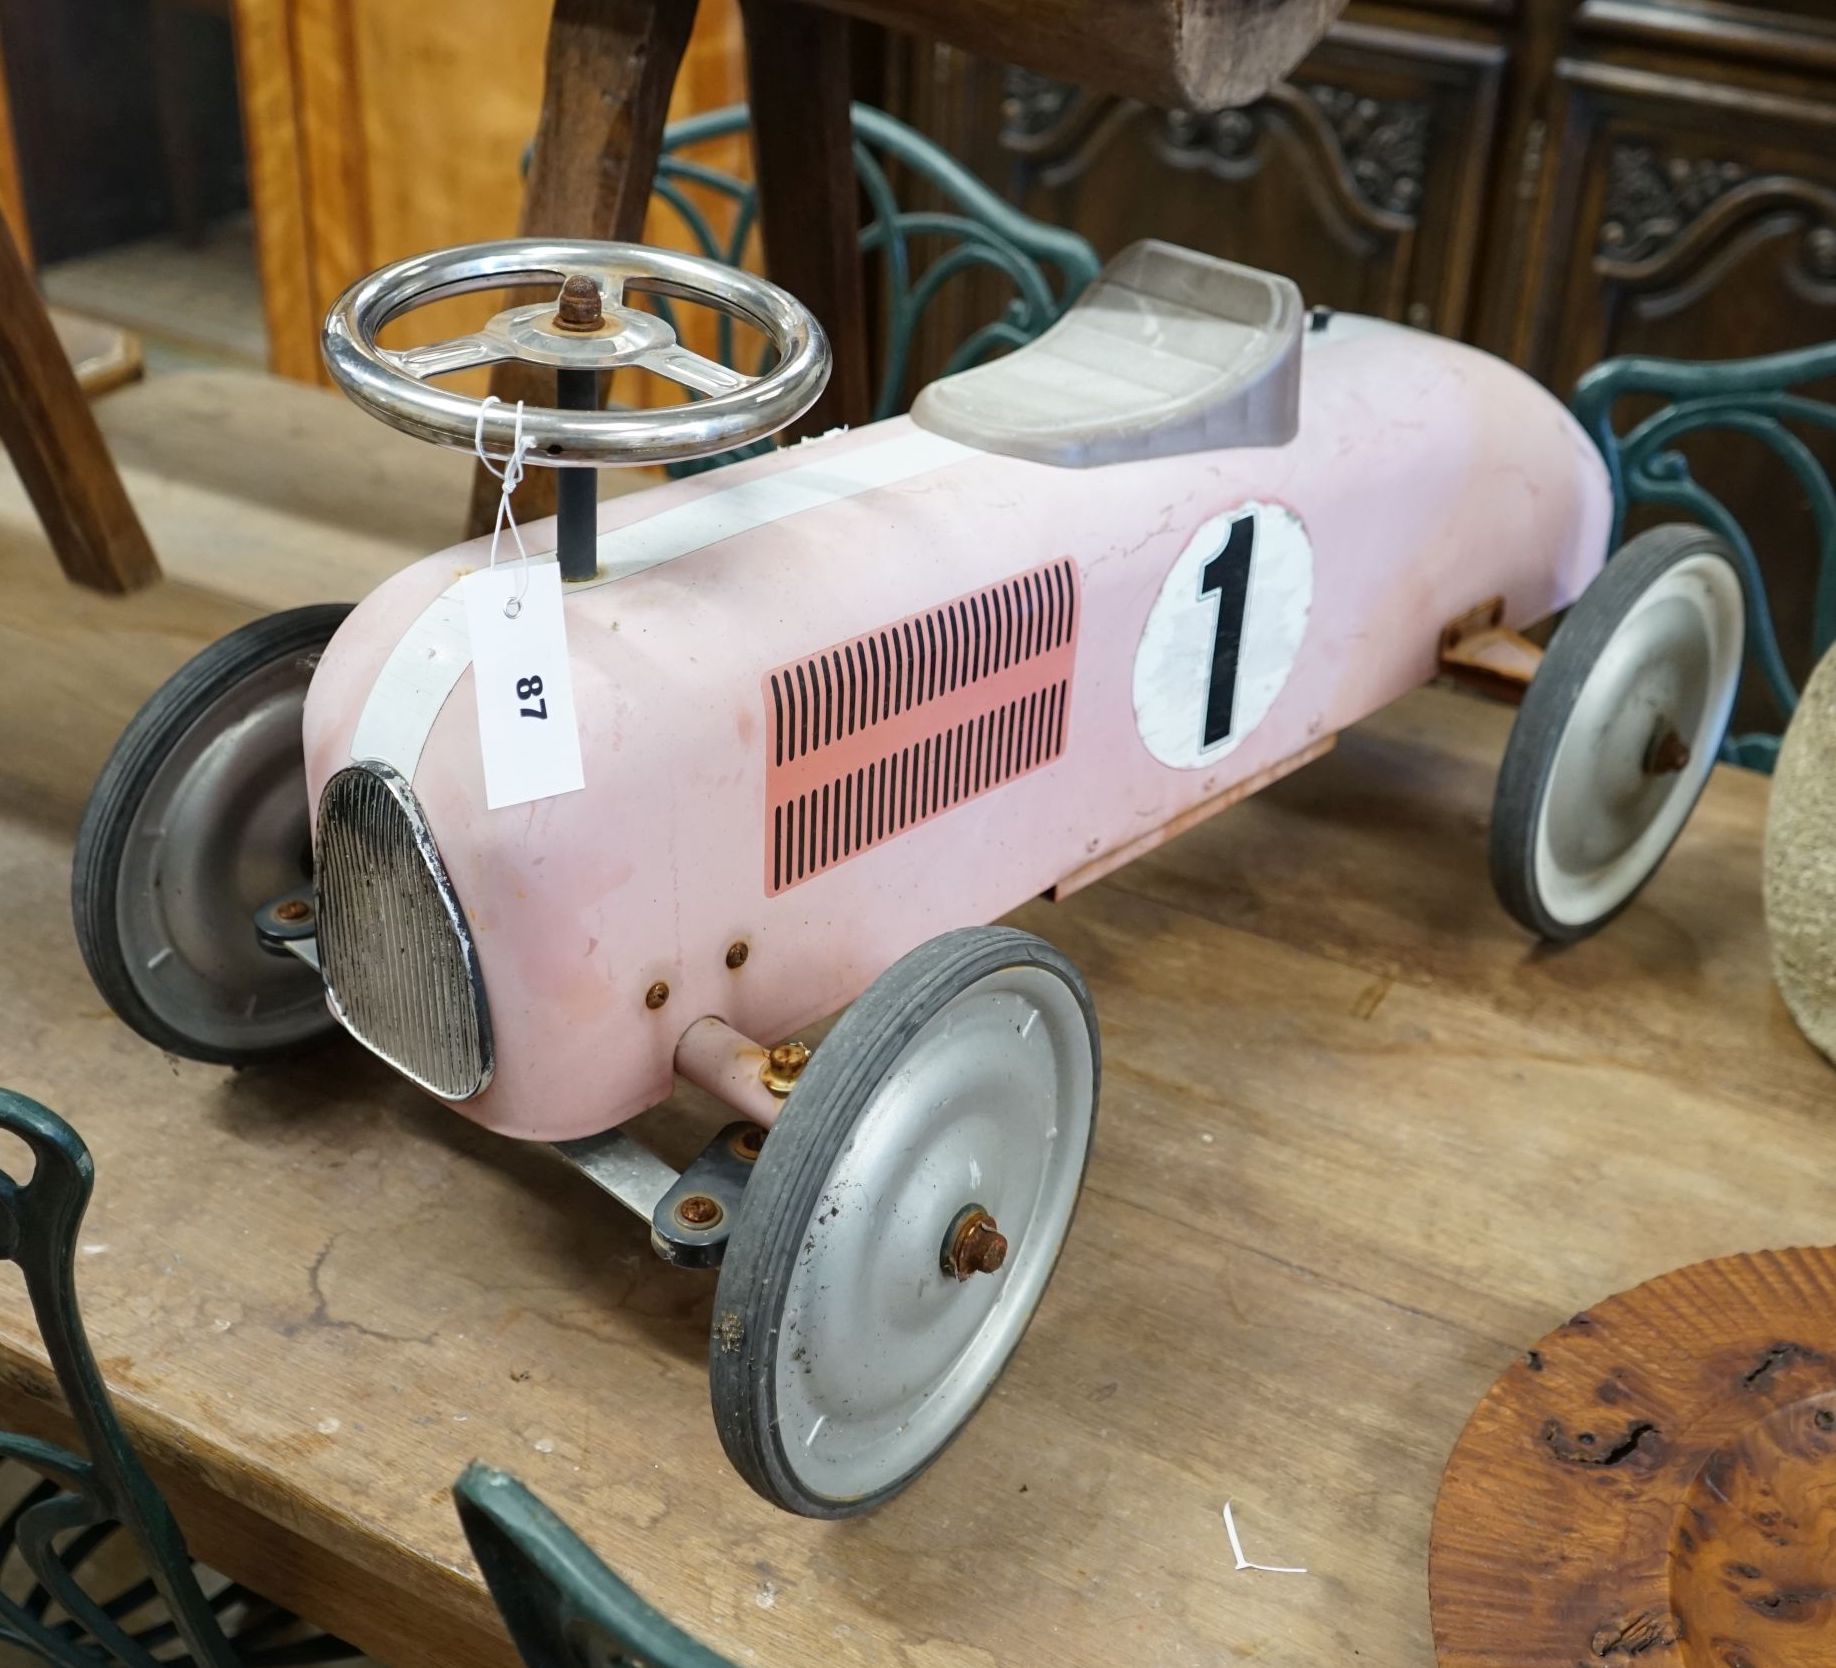 A child's sit-on toy racing car                                                                                                                                                                                             